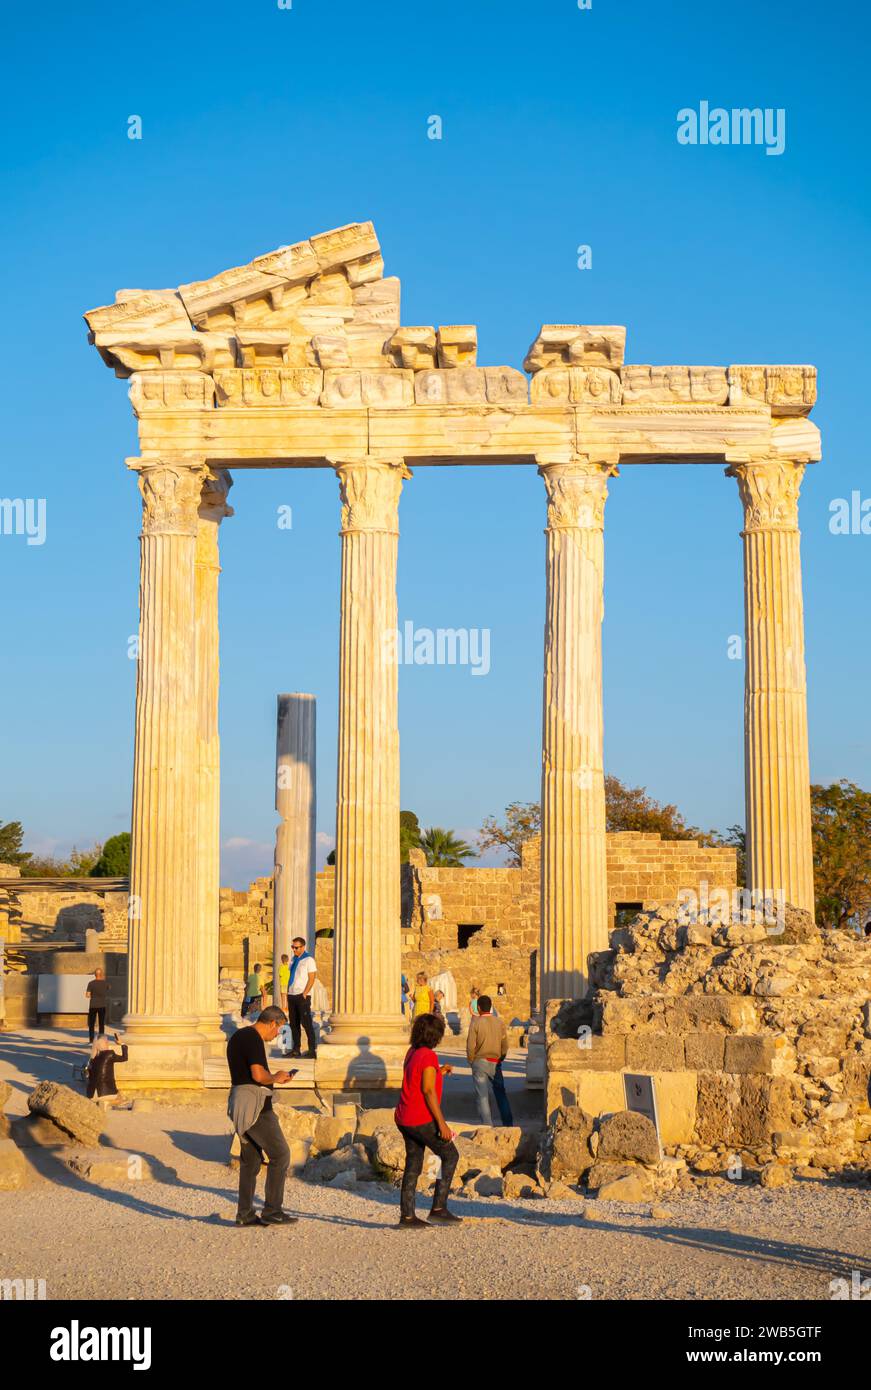 The Temple of Apollo - Roman temple, 150 A.D. during the Pax Romana era in the ancient Carian town of Side, in southern Turkey Stock Photo